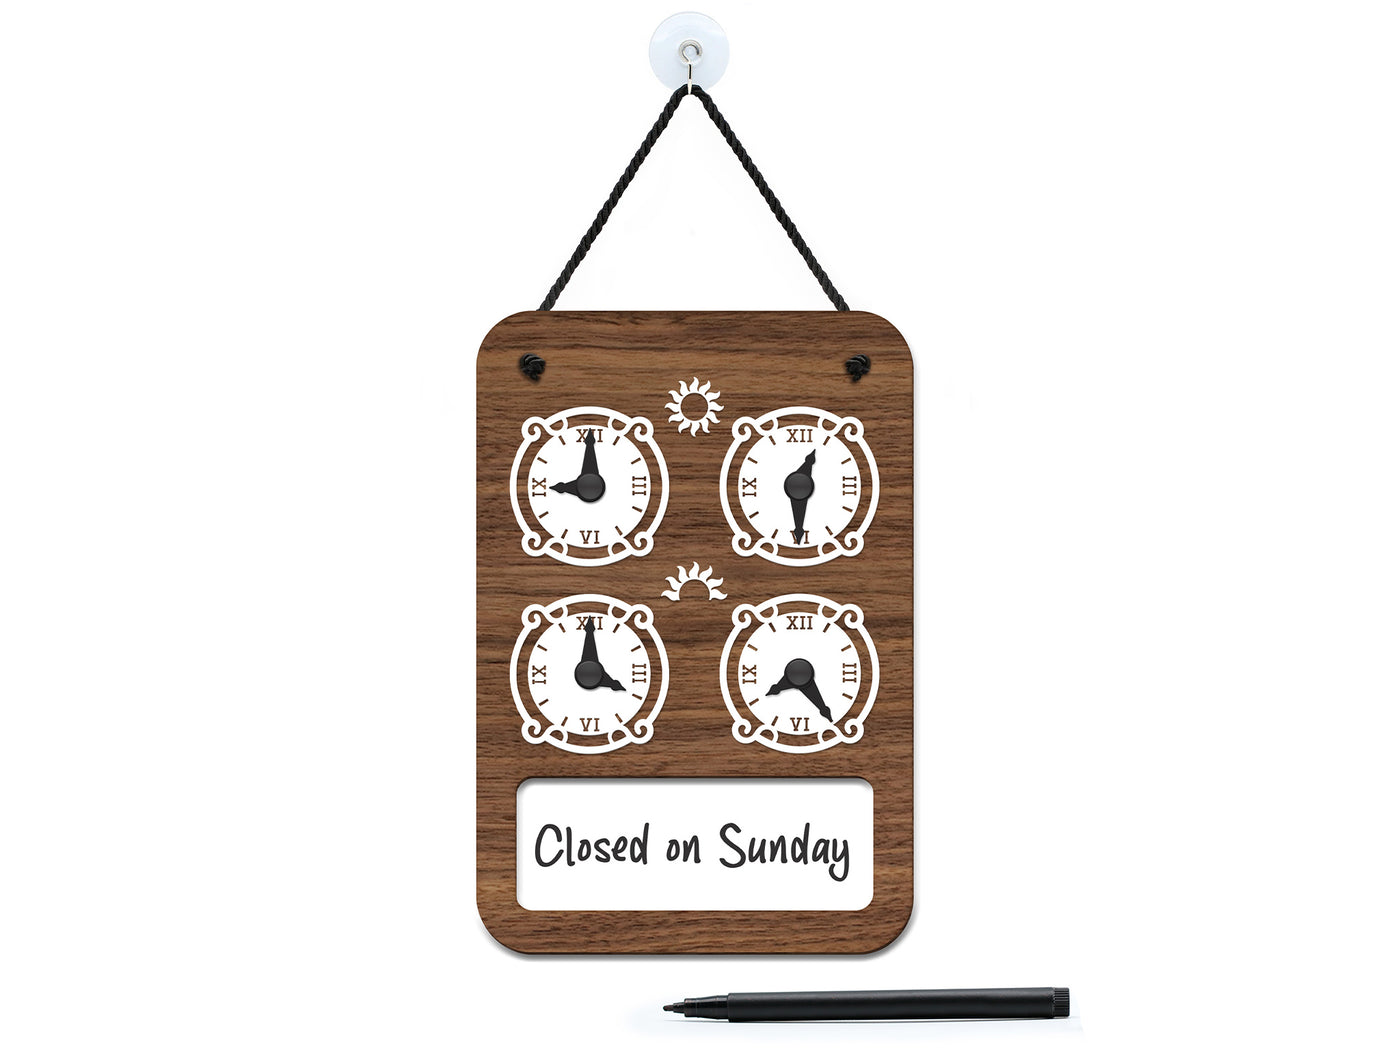 Country Chic - Opening Hours Sign - with dials and adjustable hands